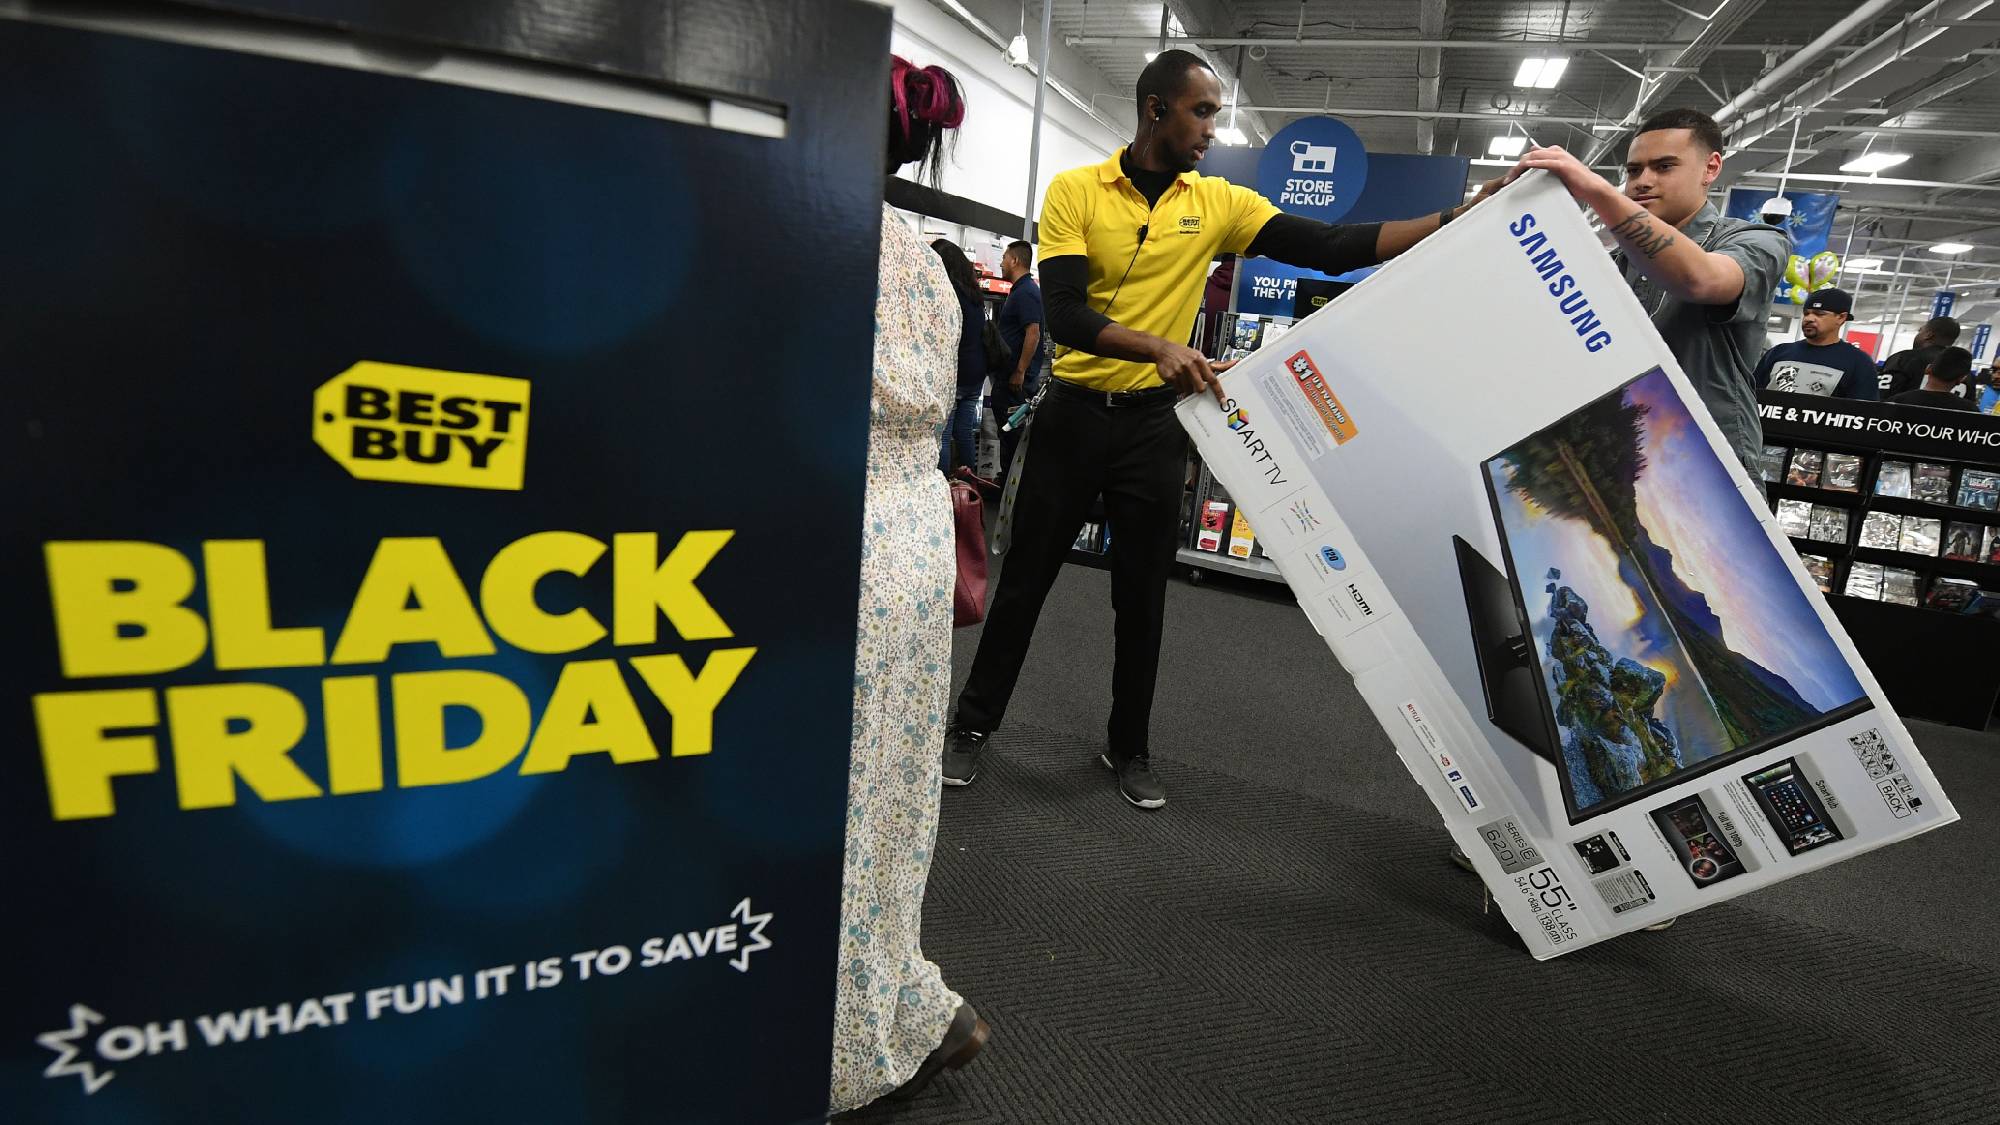 Shop the 25 Best Buy Black Friday deals I recommend now